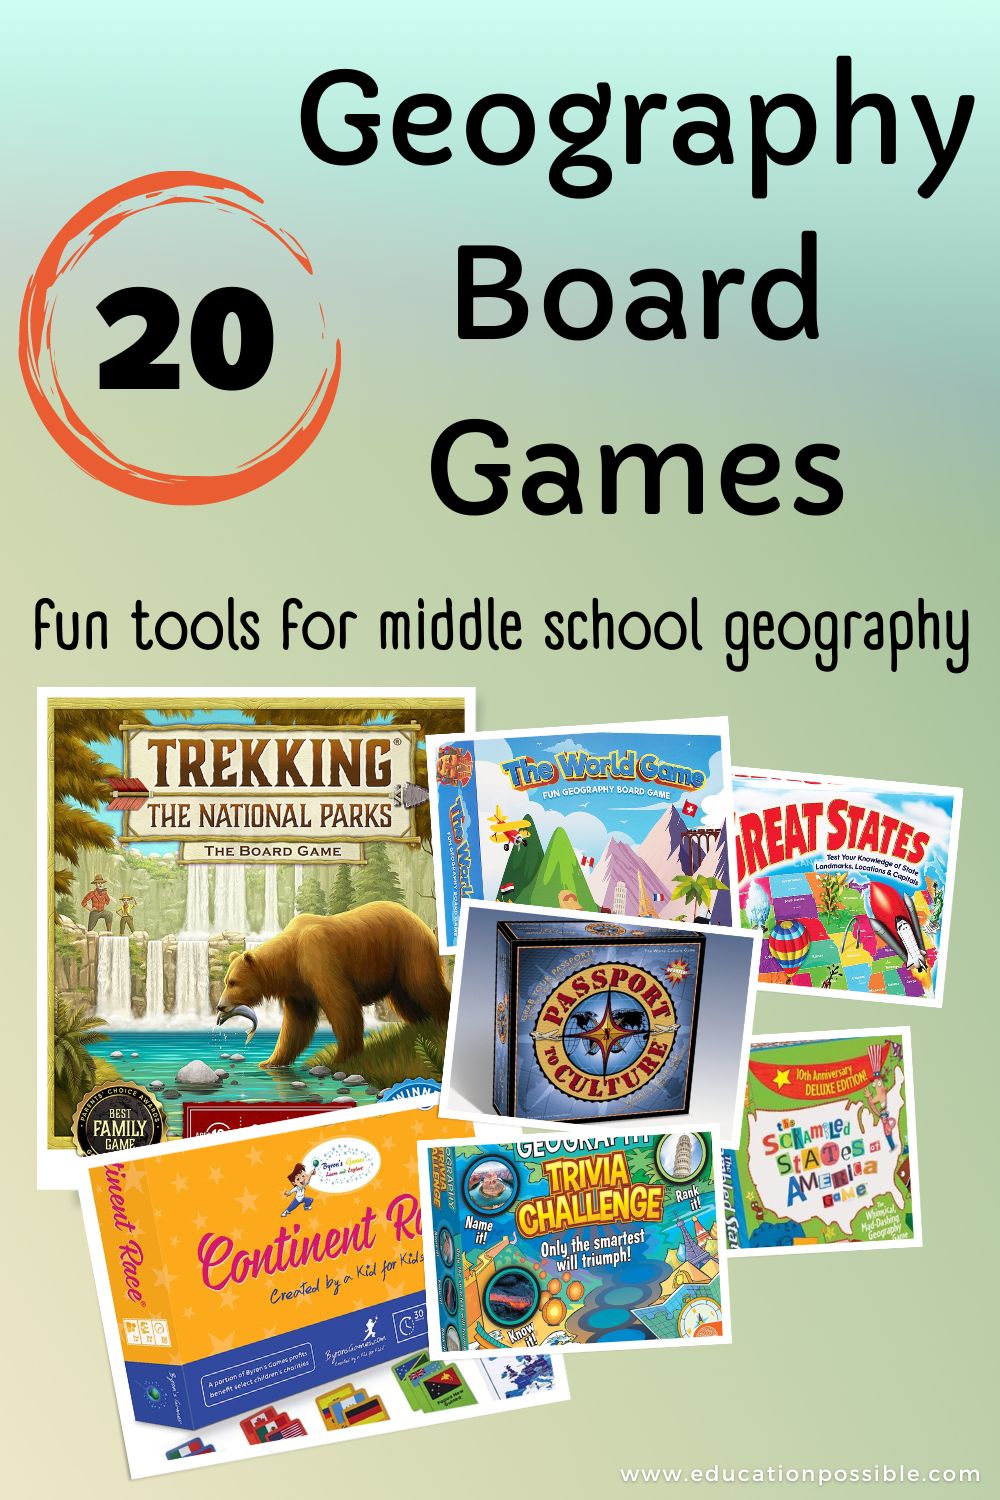 Geography Board Games